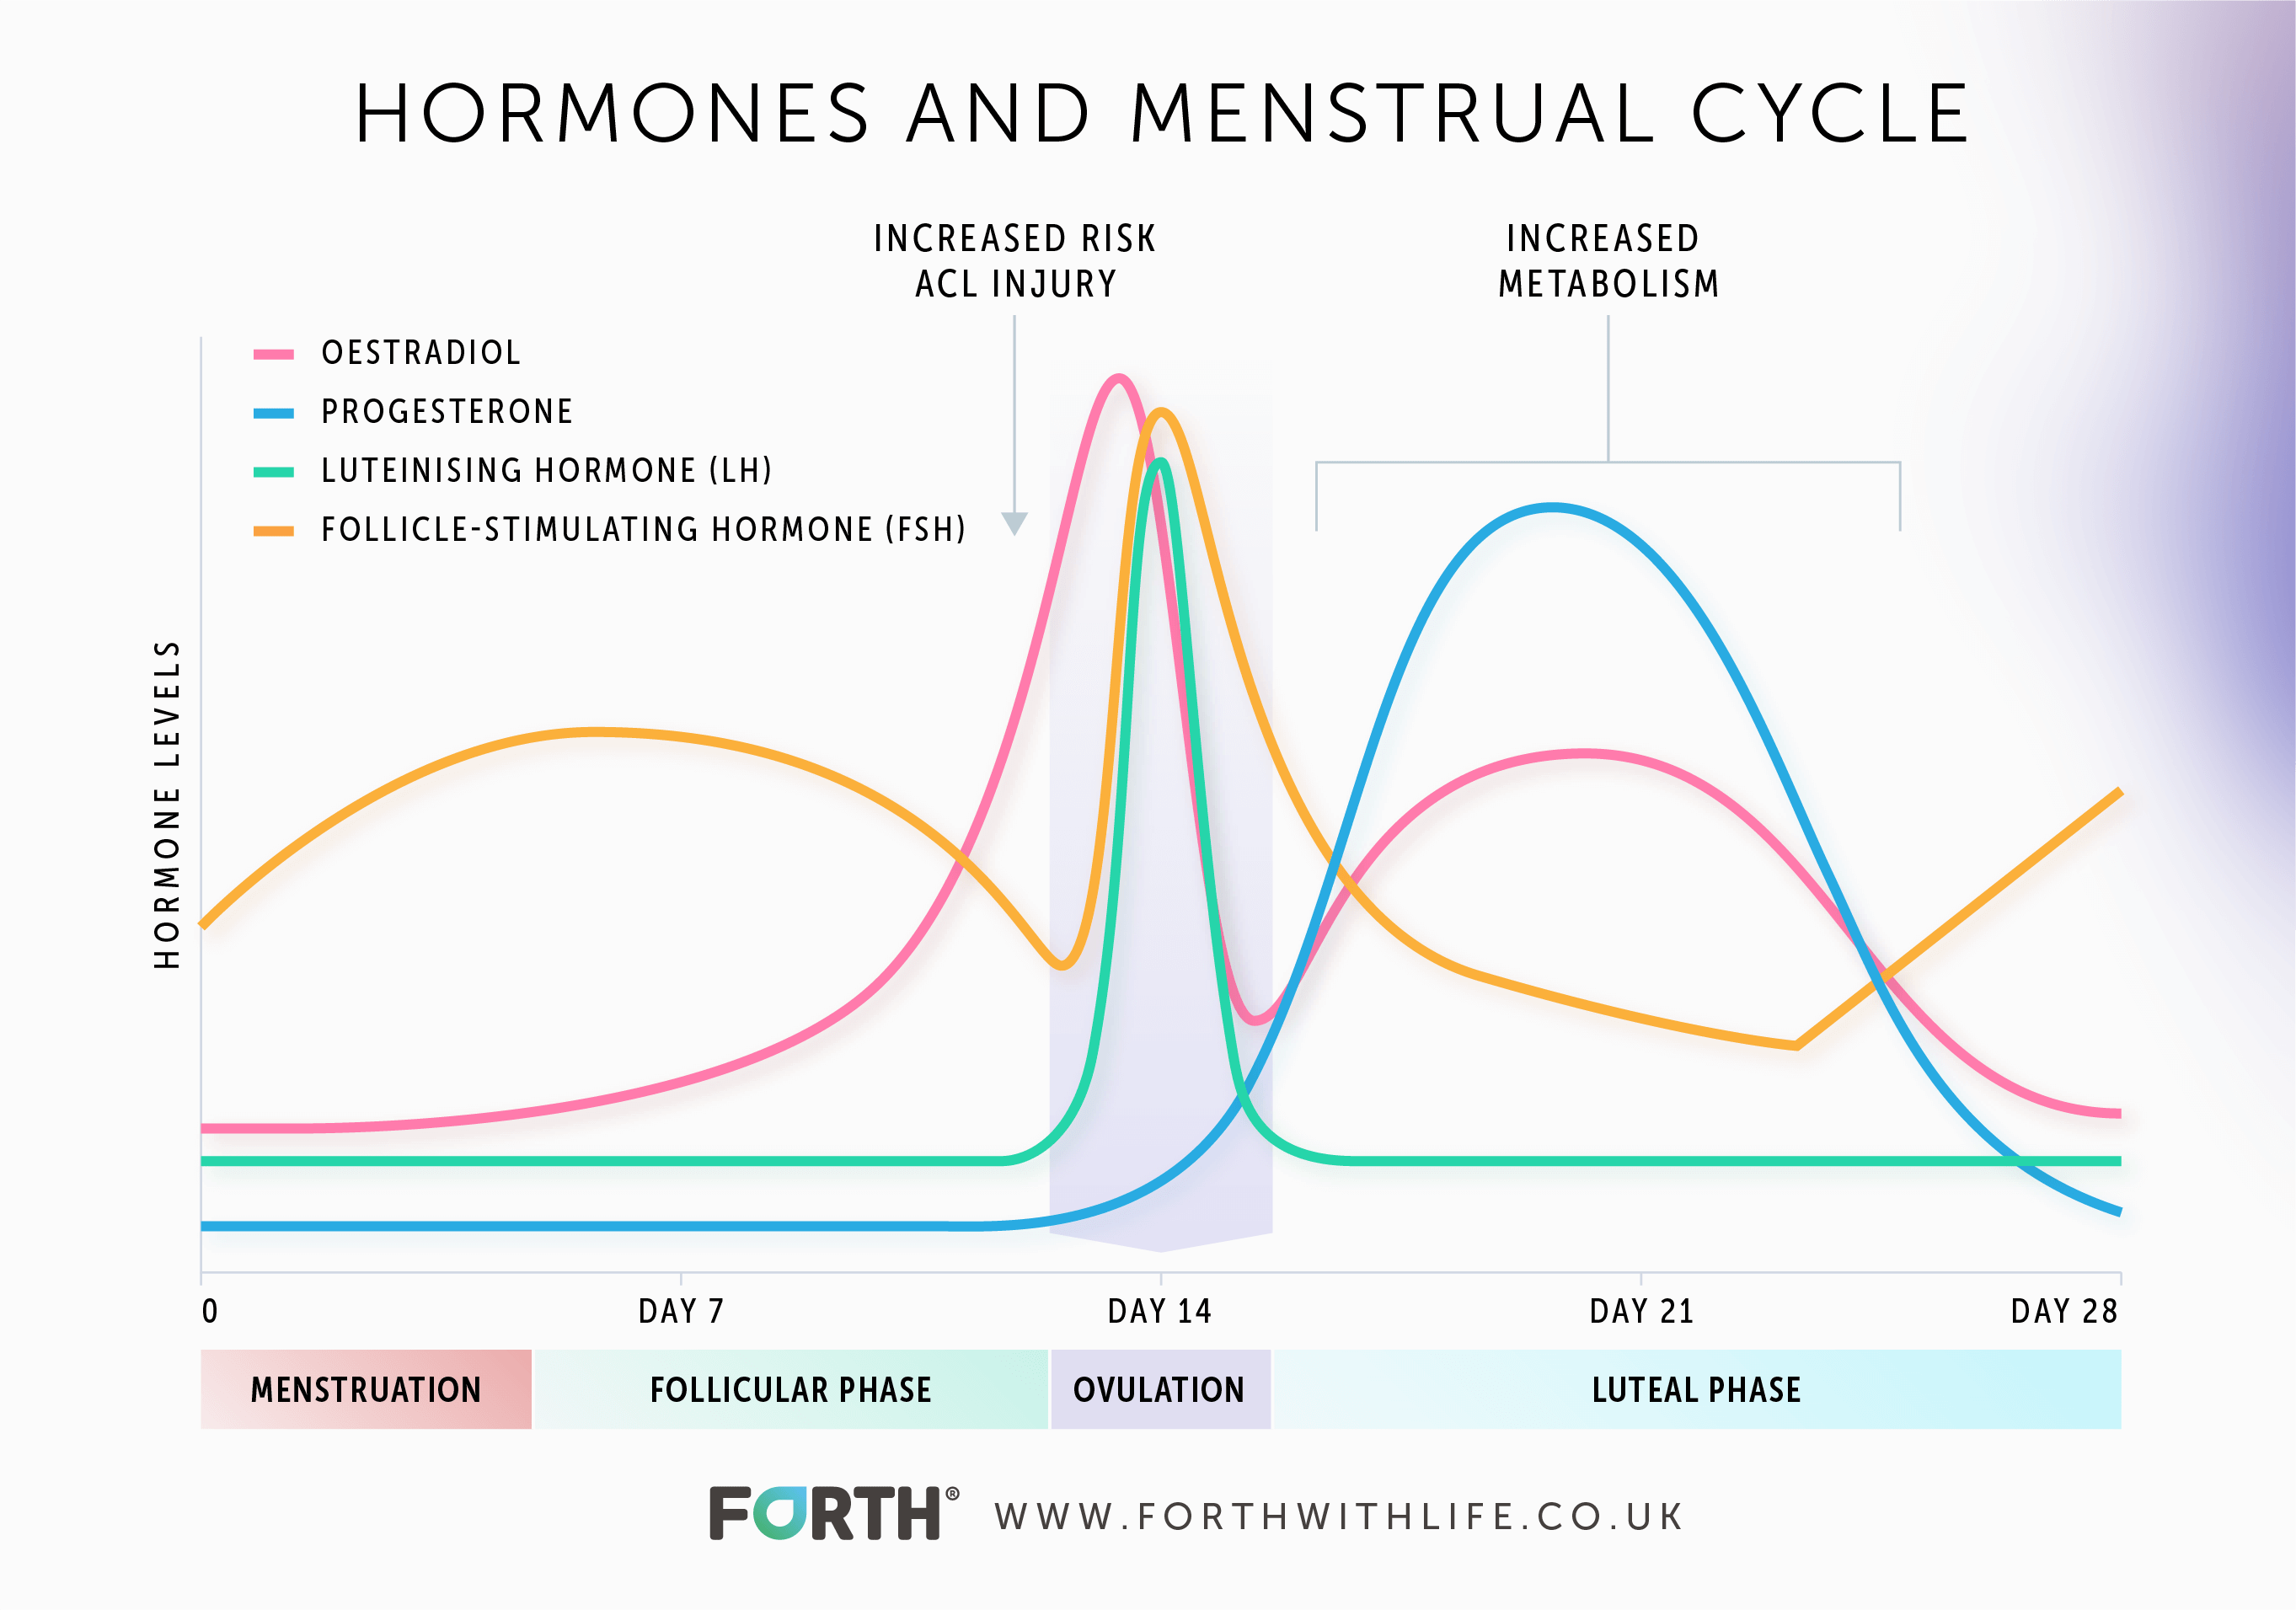 https://www.forthwithlife.co.uk/wp-content/uploads/2021/03/hormone-graph-metabolism.png